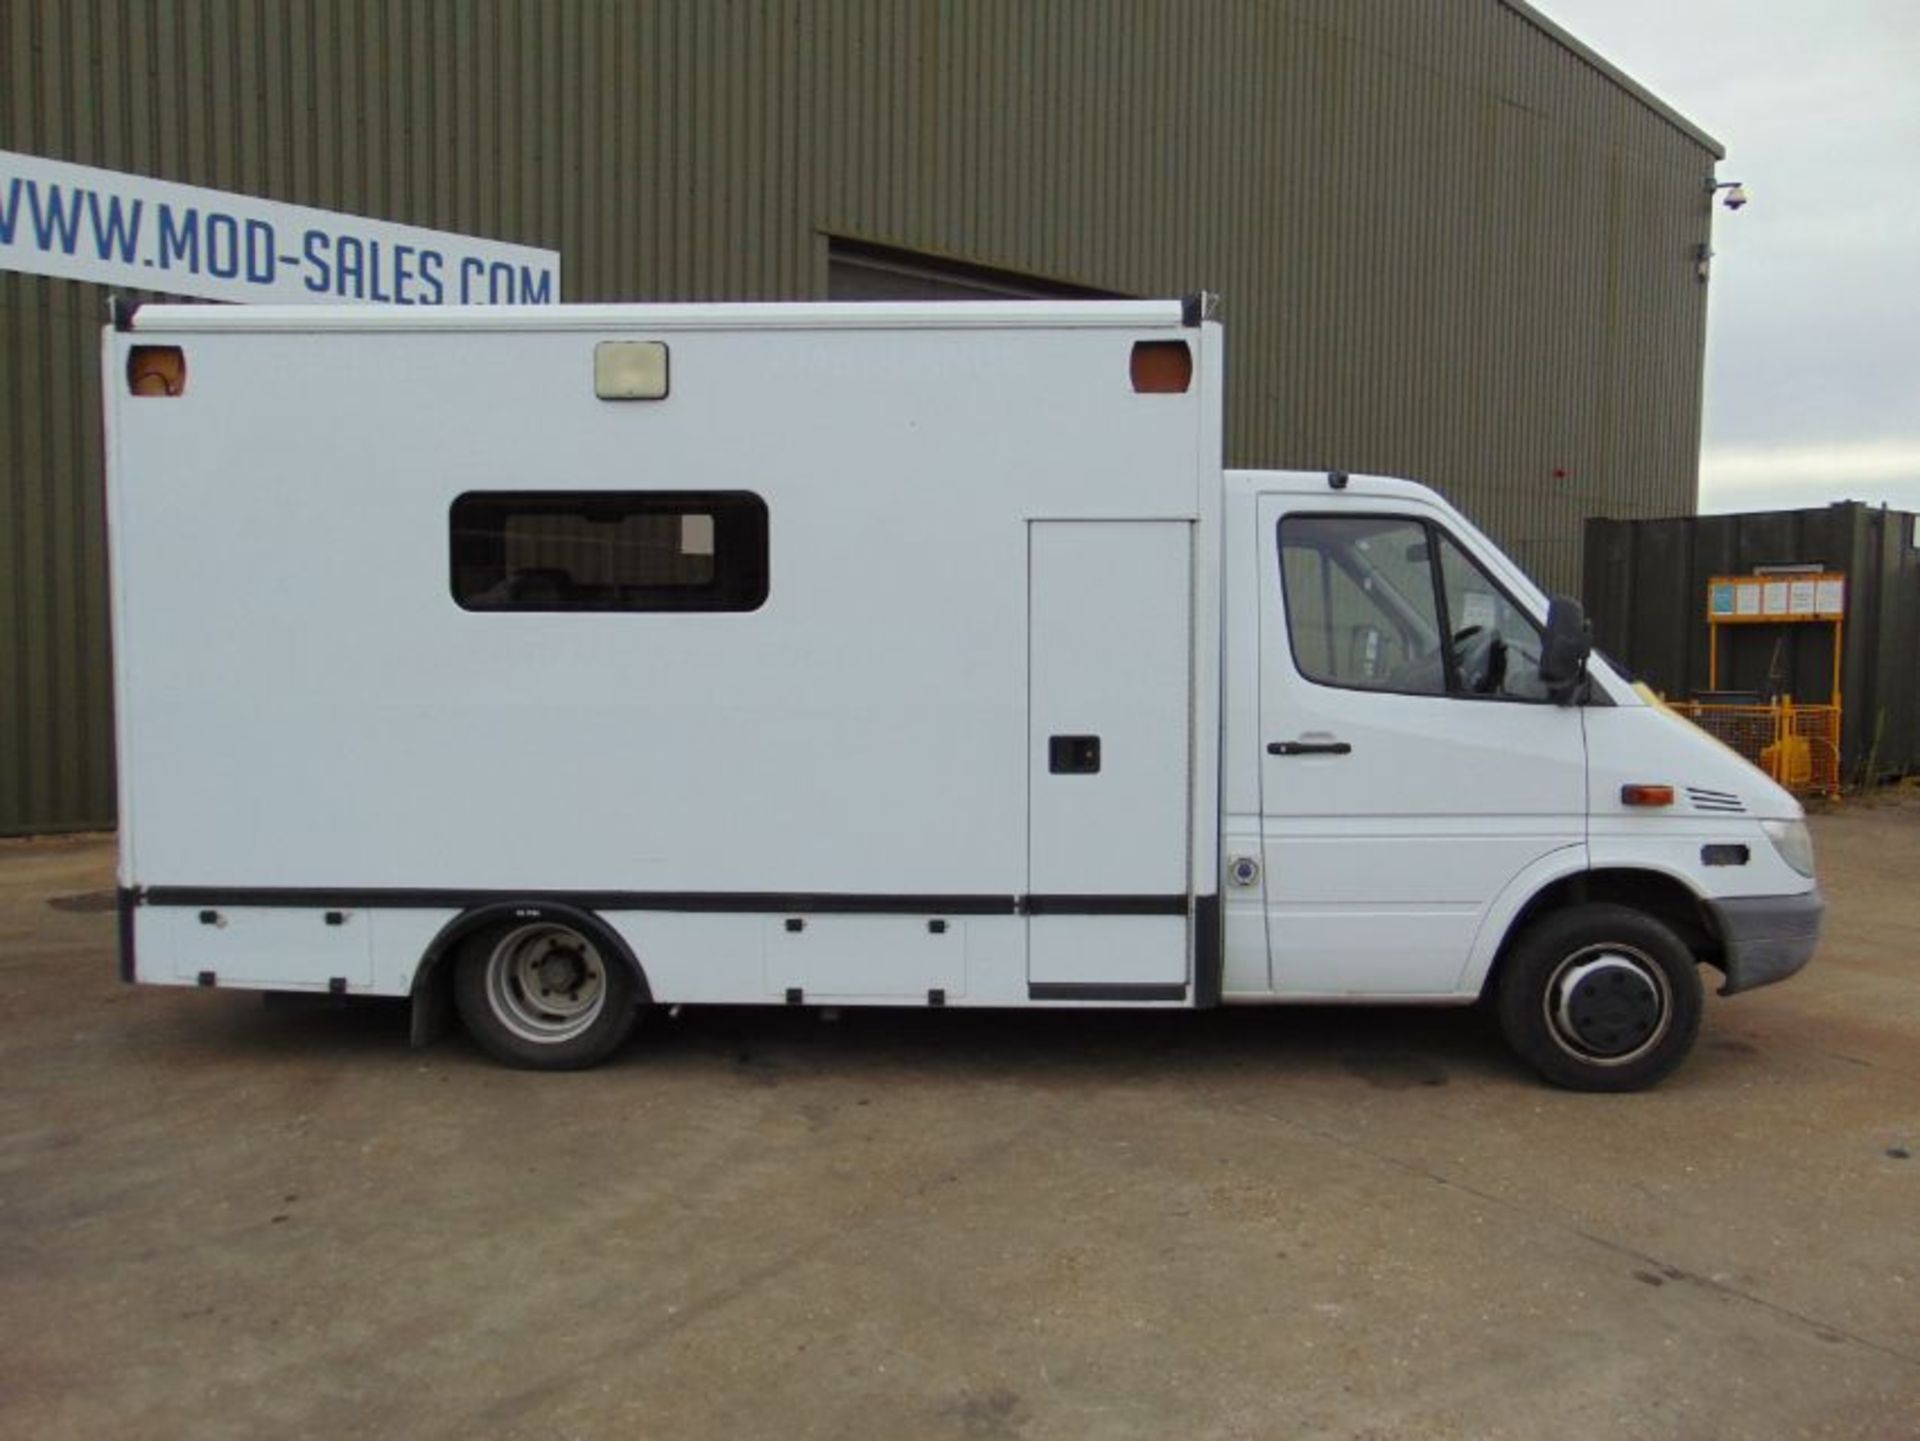 Recent Released by Atomic Weapons Establishment a 2002 Mercedes 418 CDi Ambulance ONLY 32,825 Miles! - Image 5 of 34